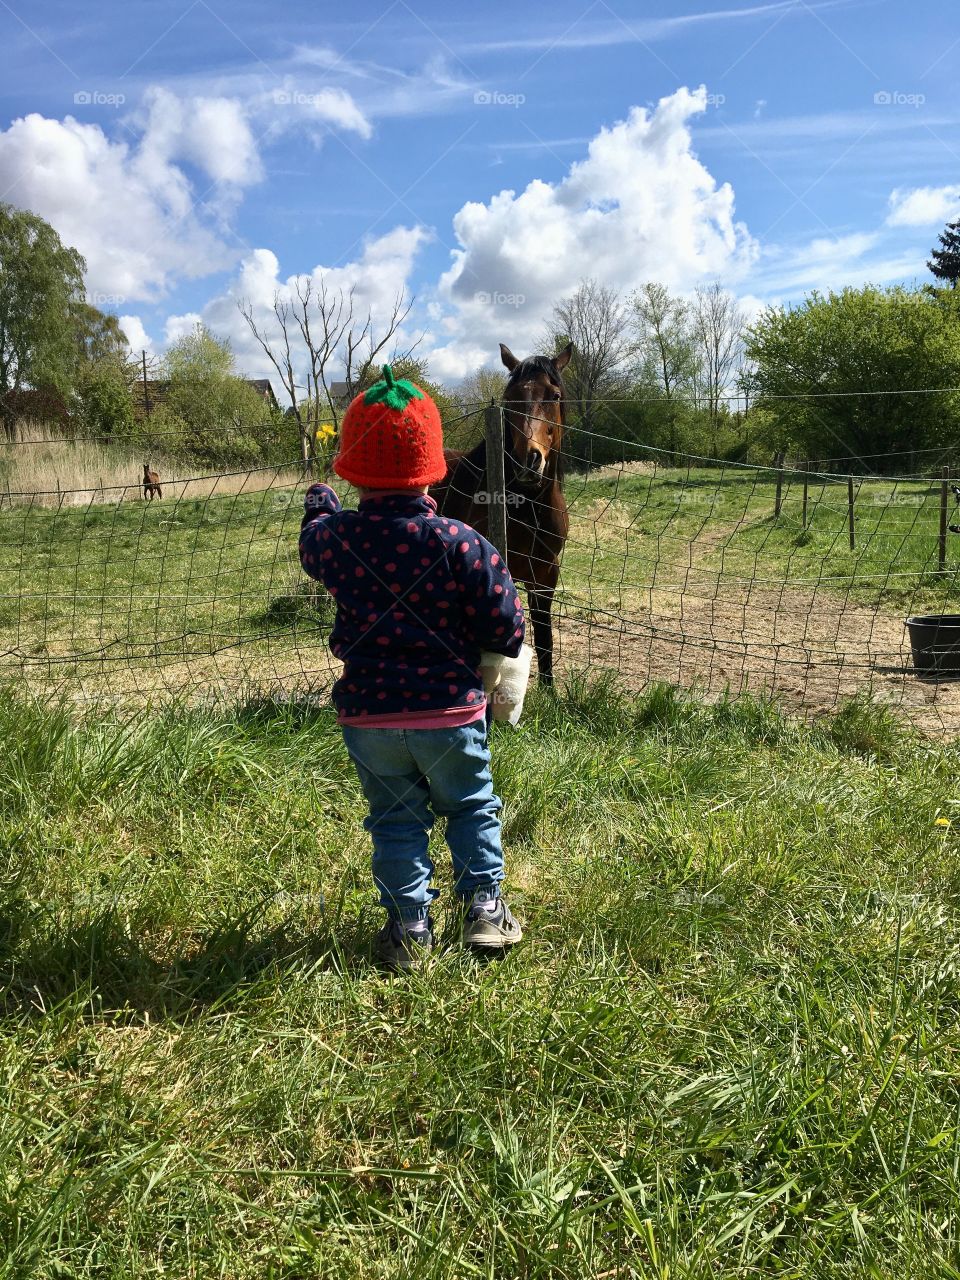 Kid and horse